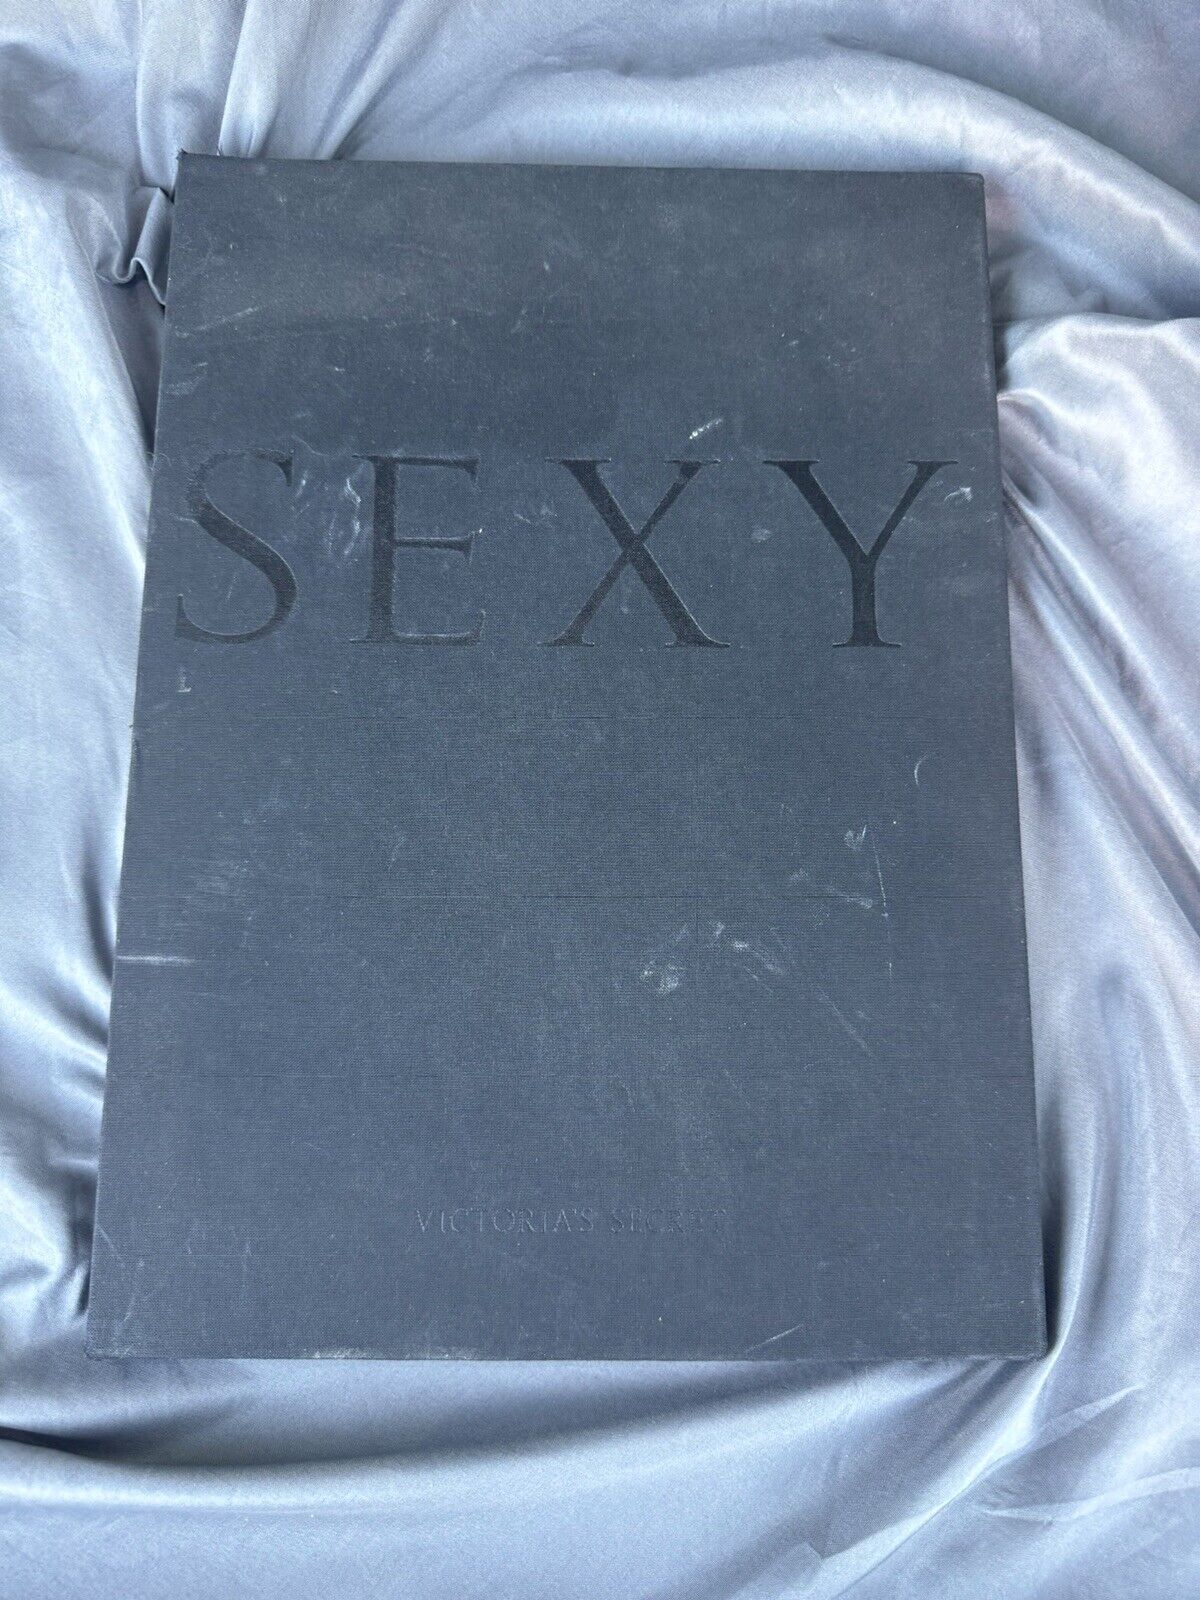 SEXY : Victoria’s Secret 2002 Large Photo Book Famous Models First Edition Rare